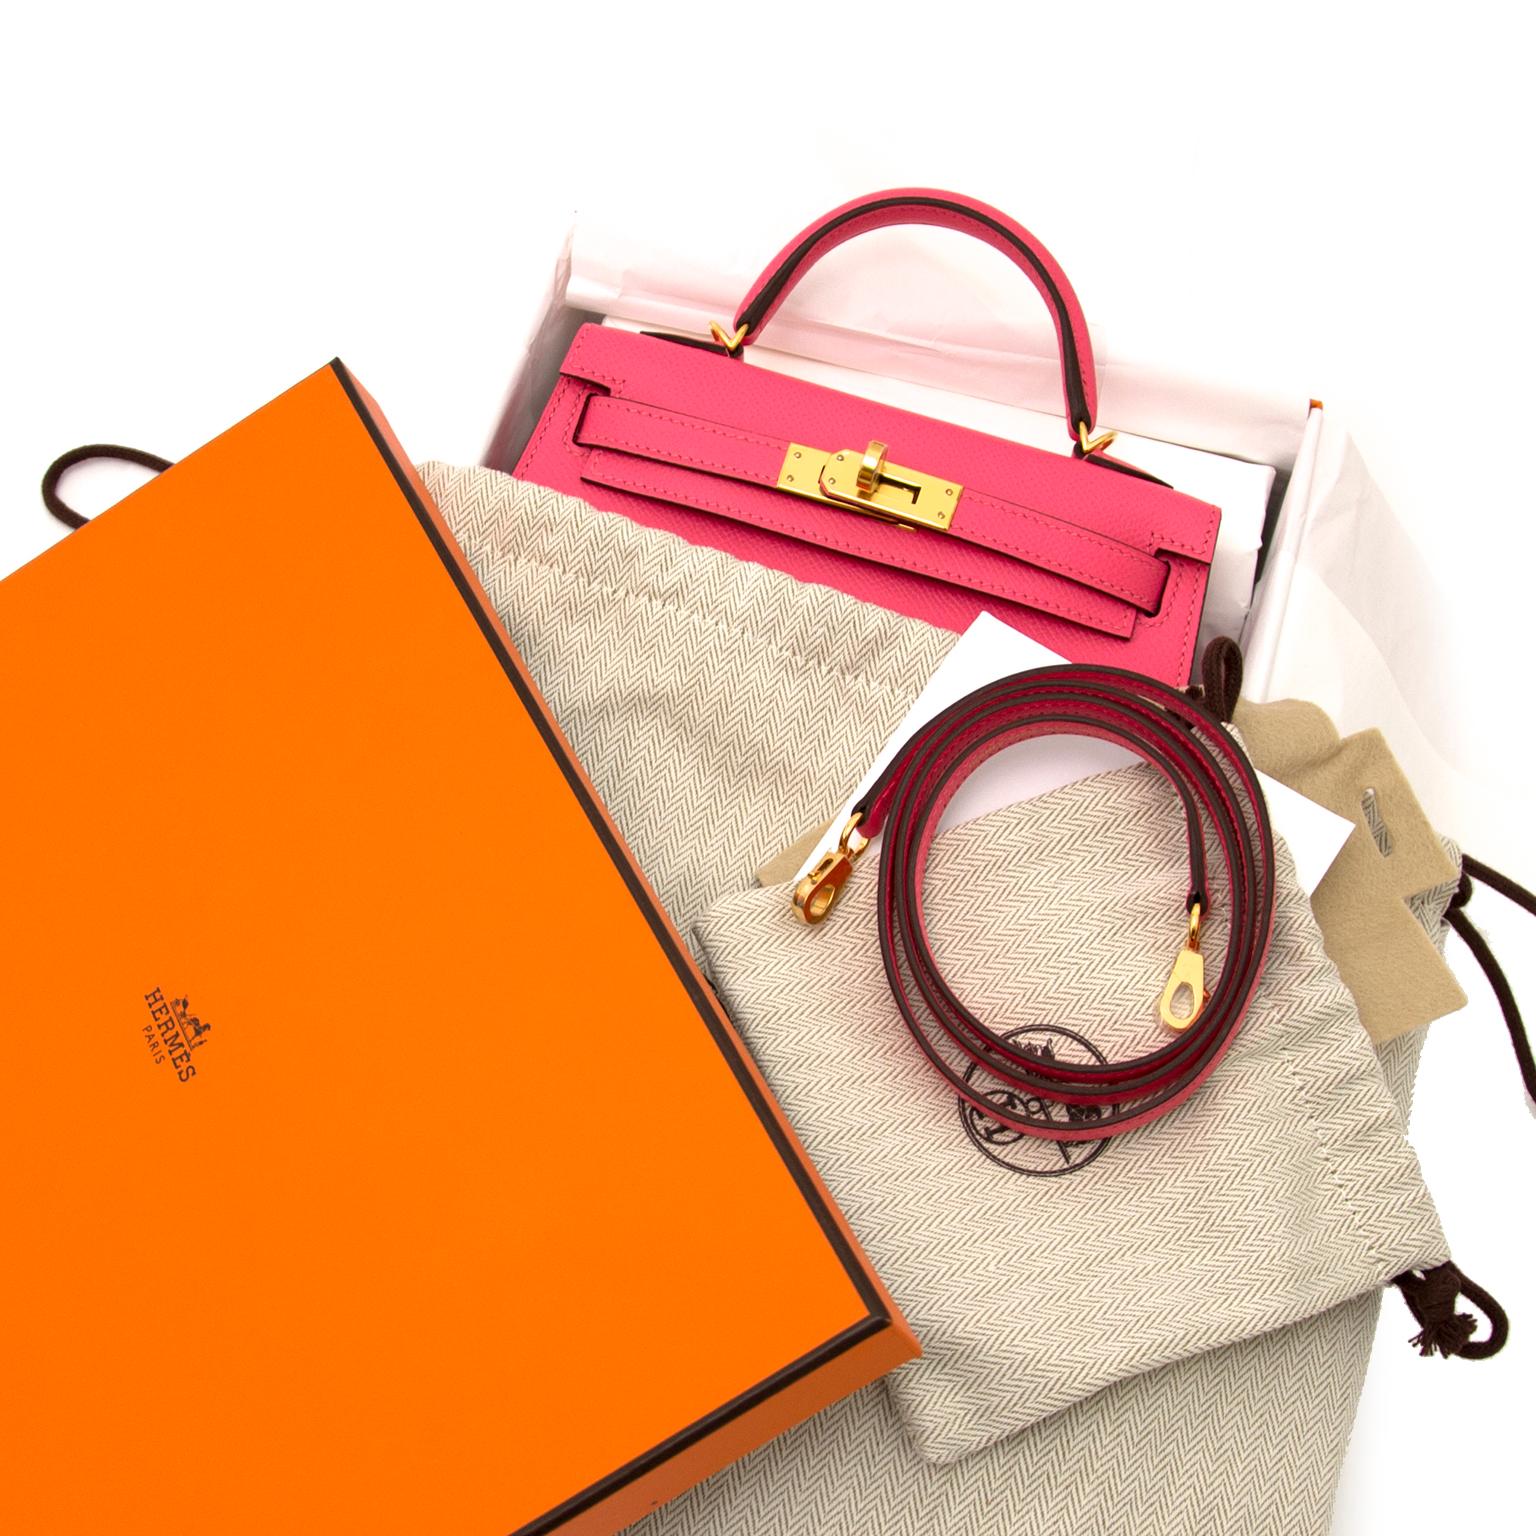 Hermès Kelly II 20cm Mini Veau Epsom Rose Azalee GHW 
Rose azalee, one of the most perfect pink colors Hermès' ever made.

Hermès Kelly mini bags are adorable and almost impossible to get your hands on!

This stunning little piece comes with full